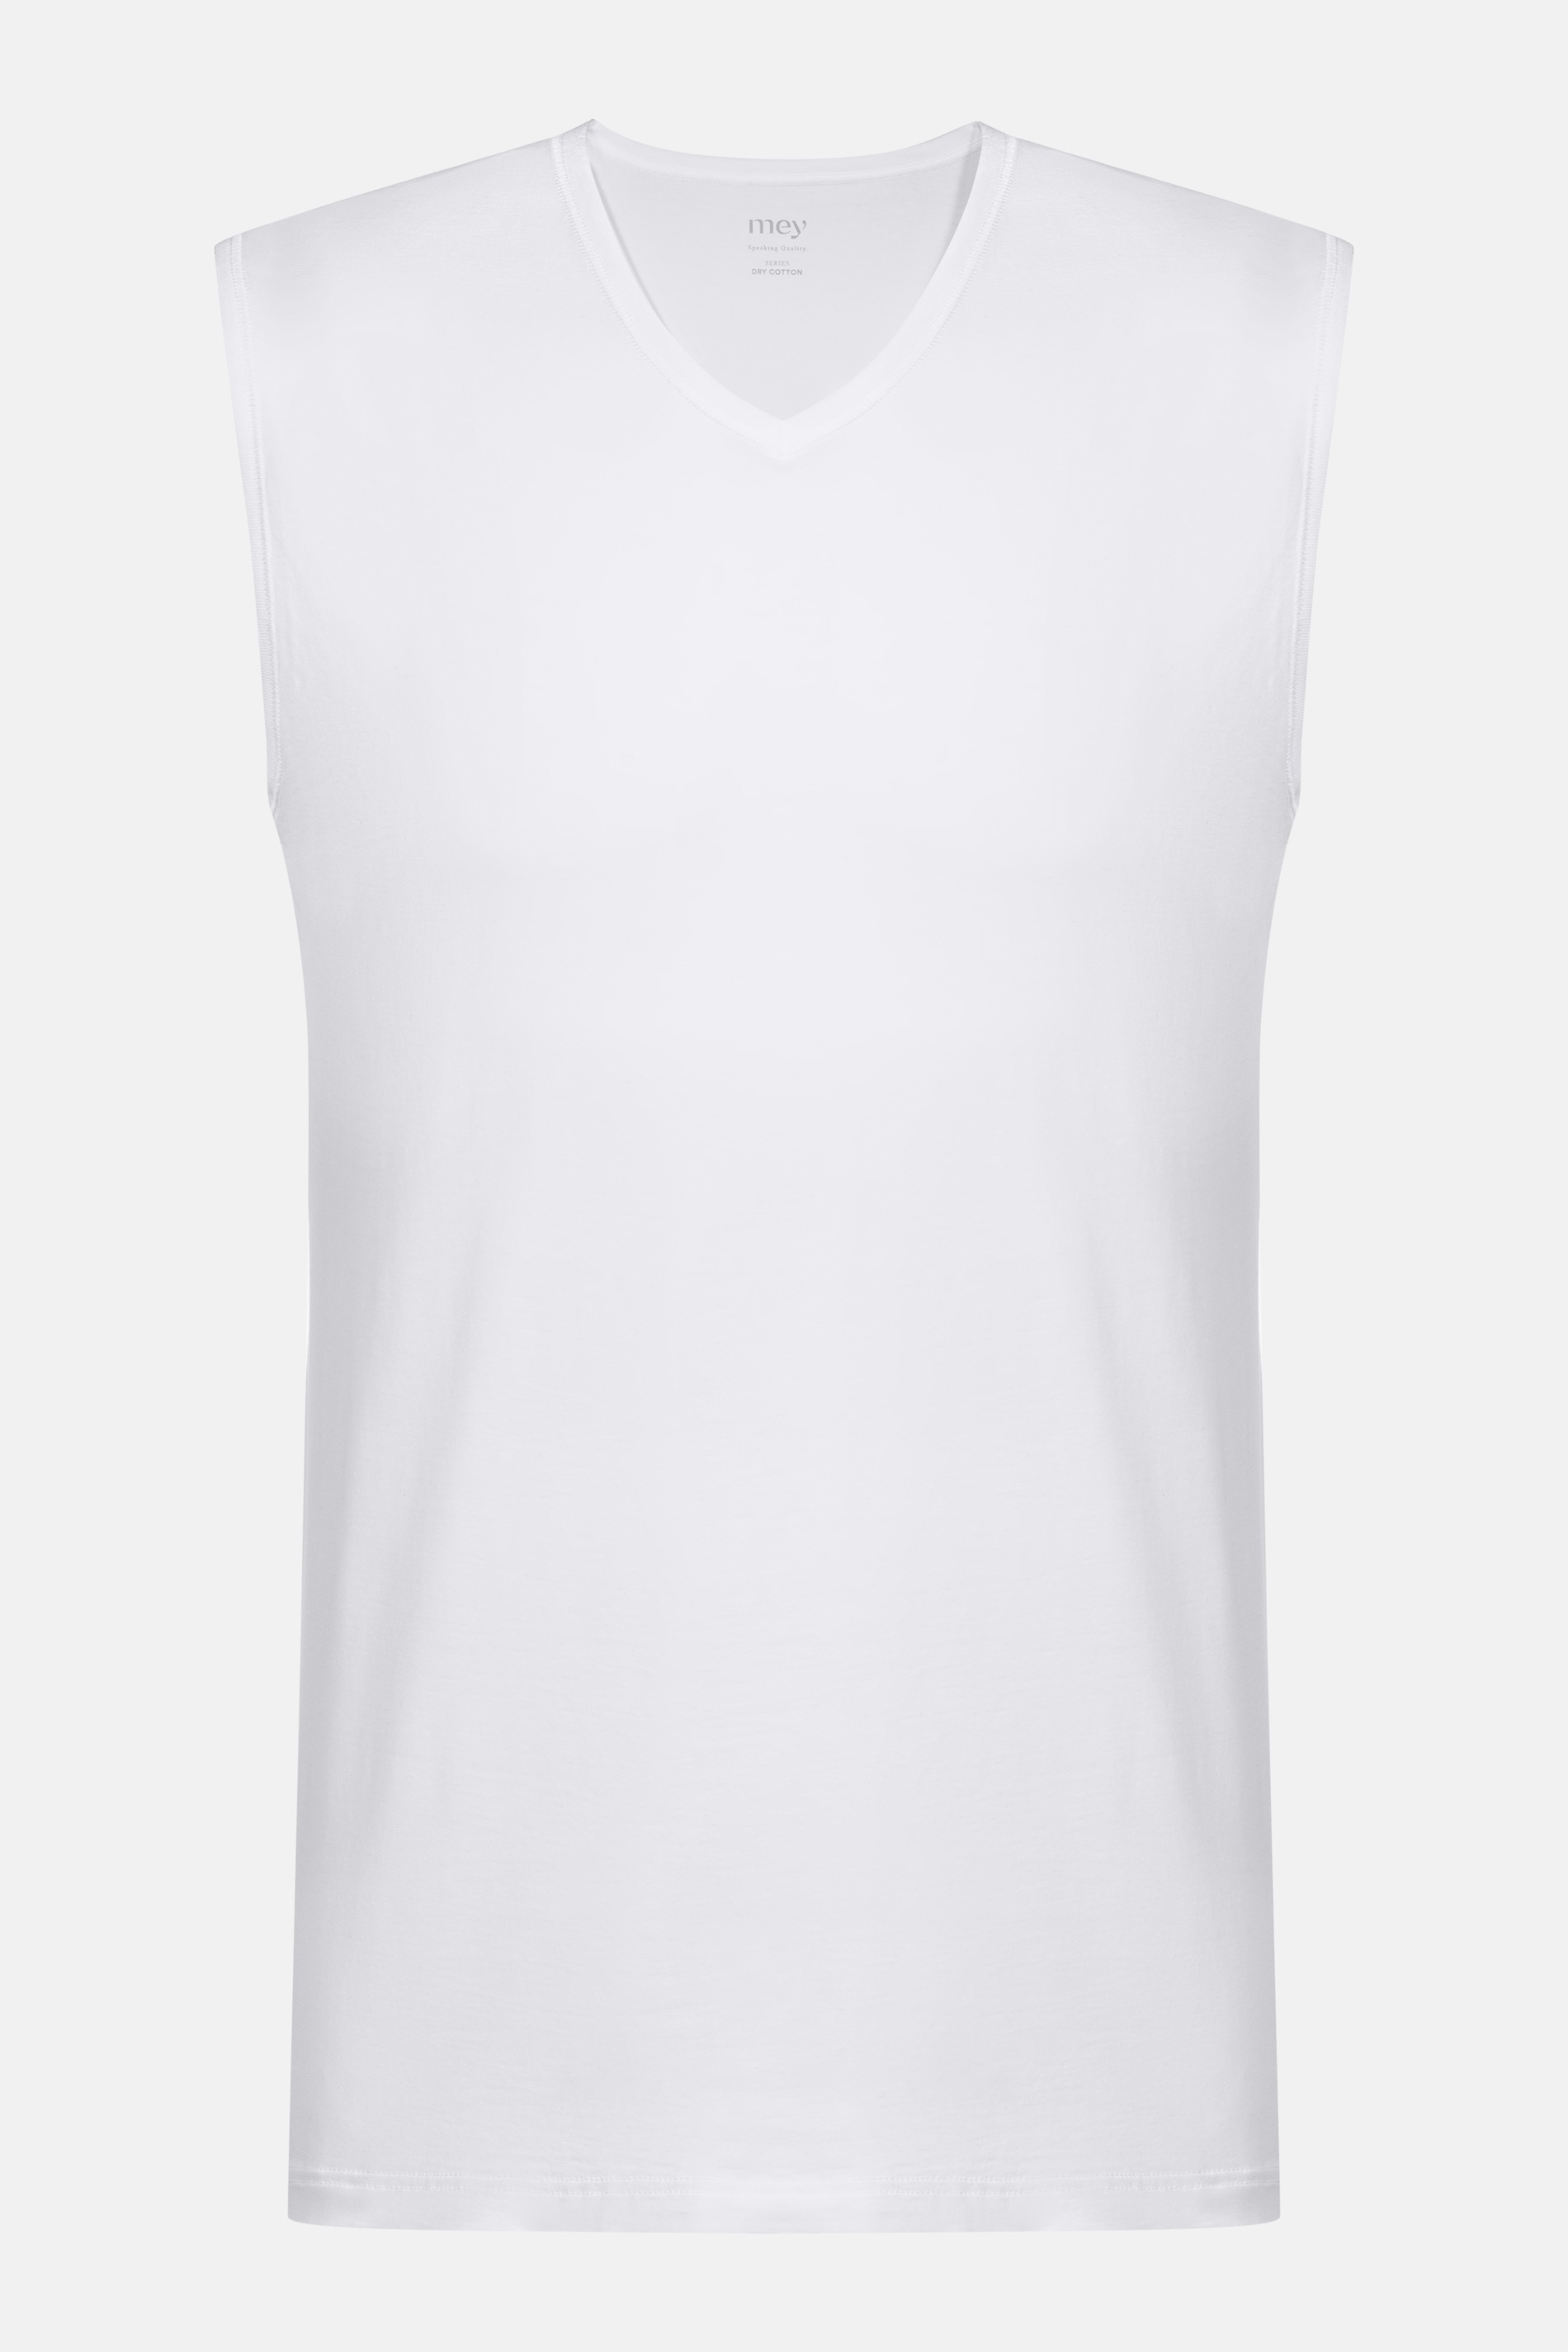 Muscle-shirt Wit Serie Dry Cotton Uitknippen | mey®